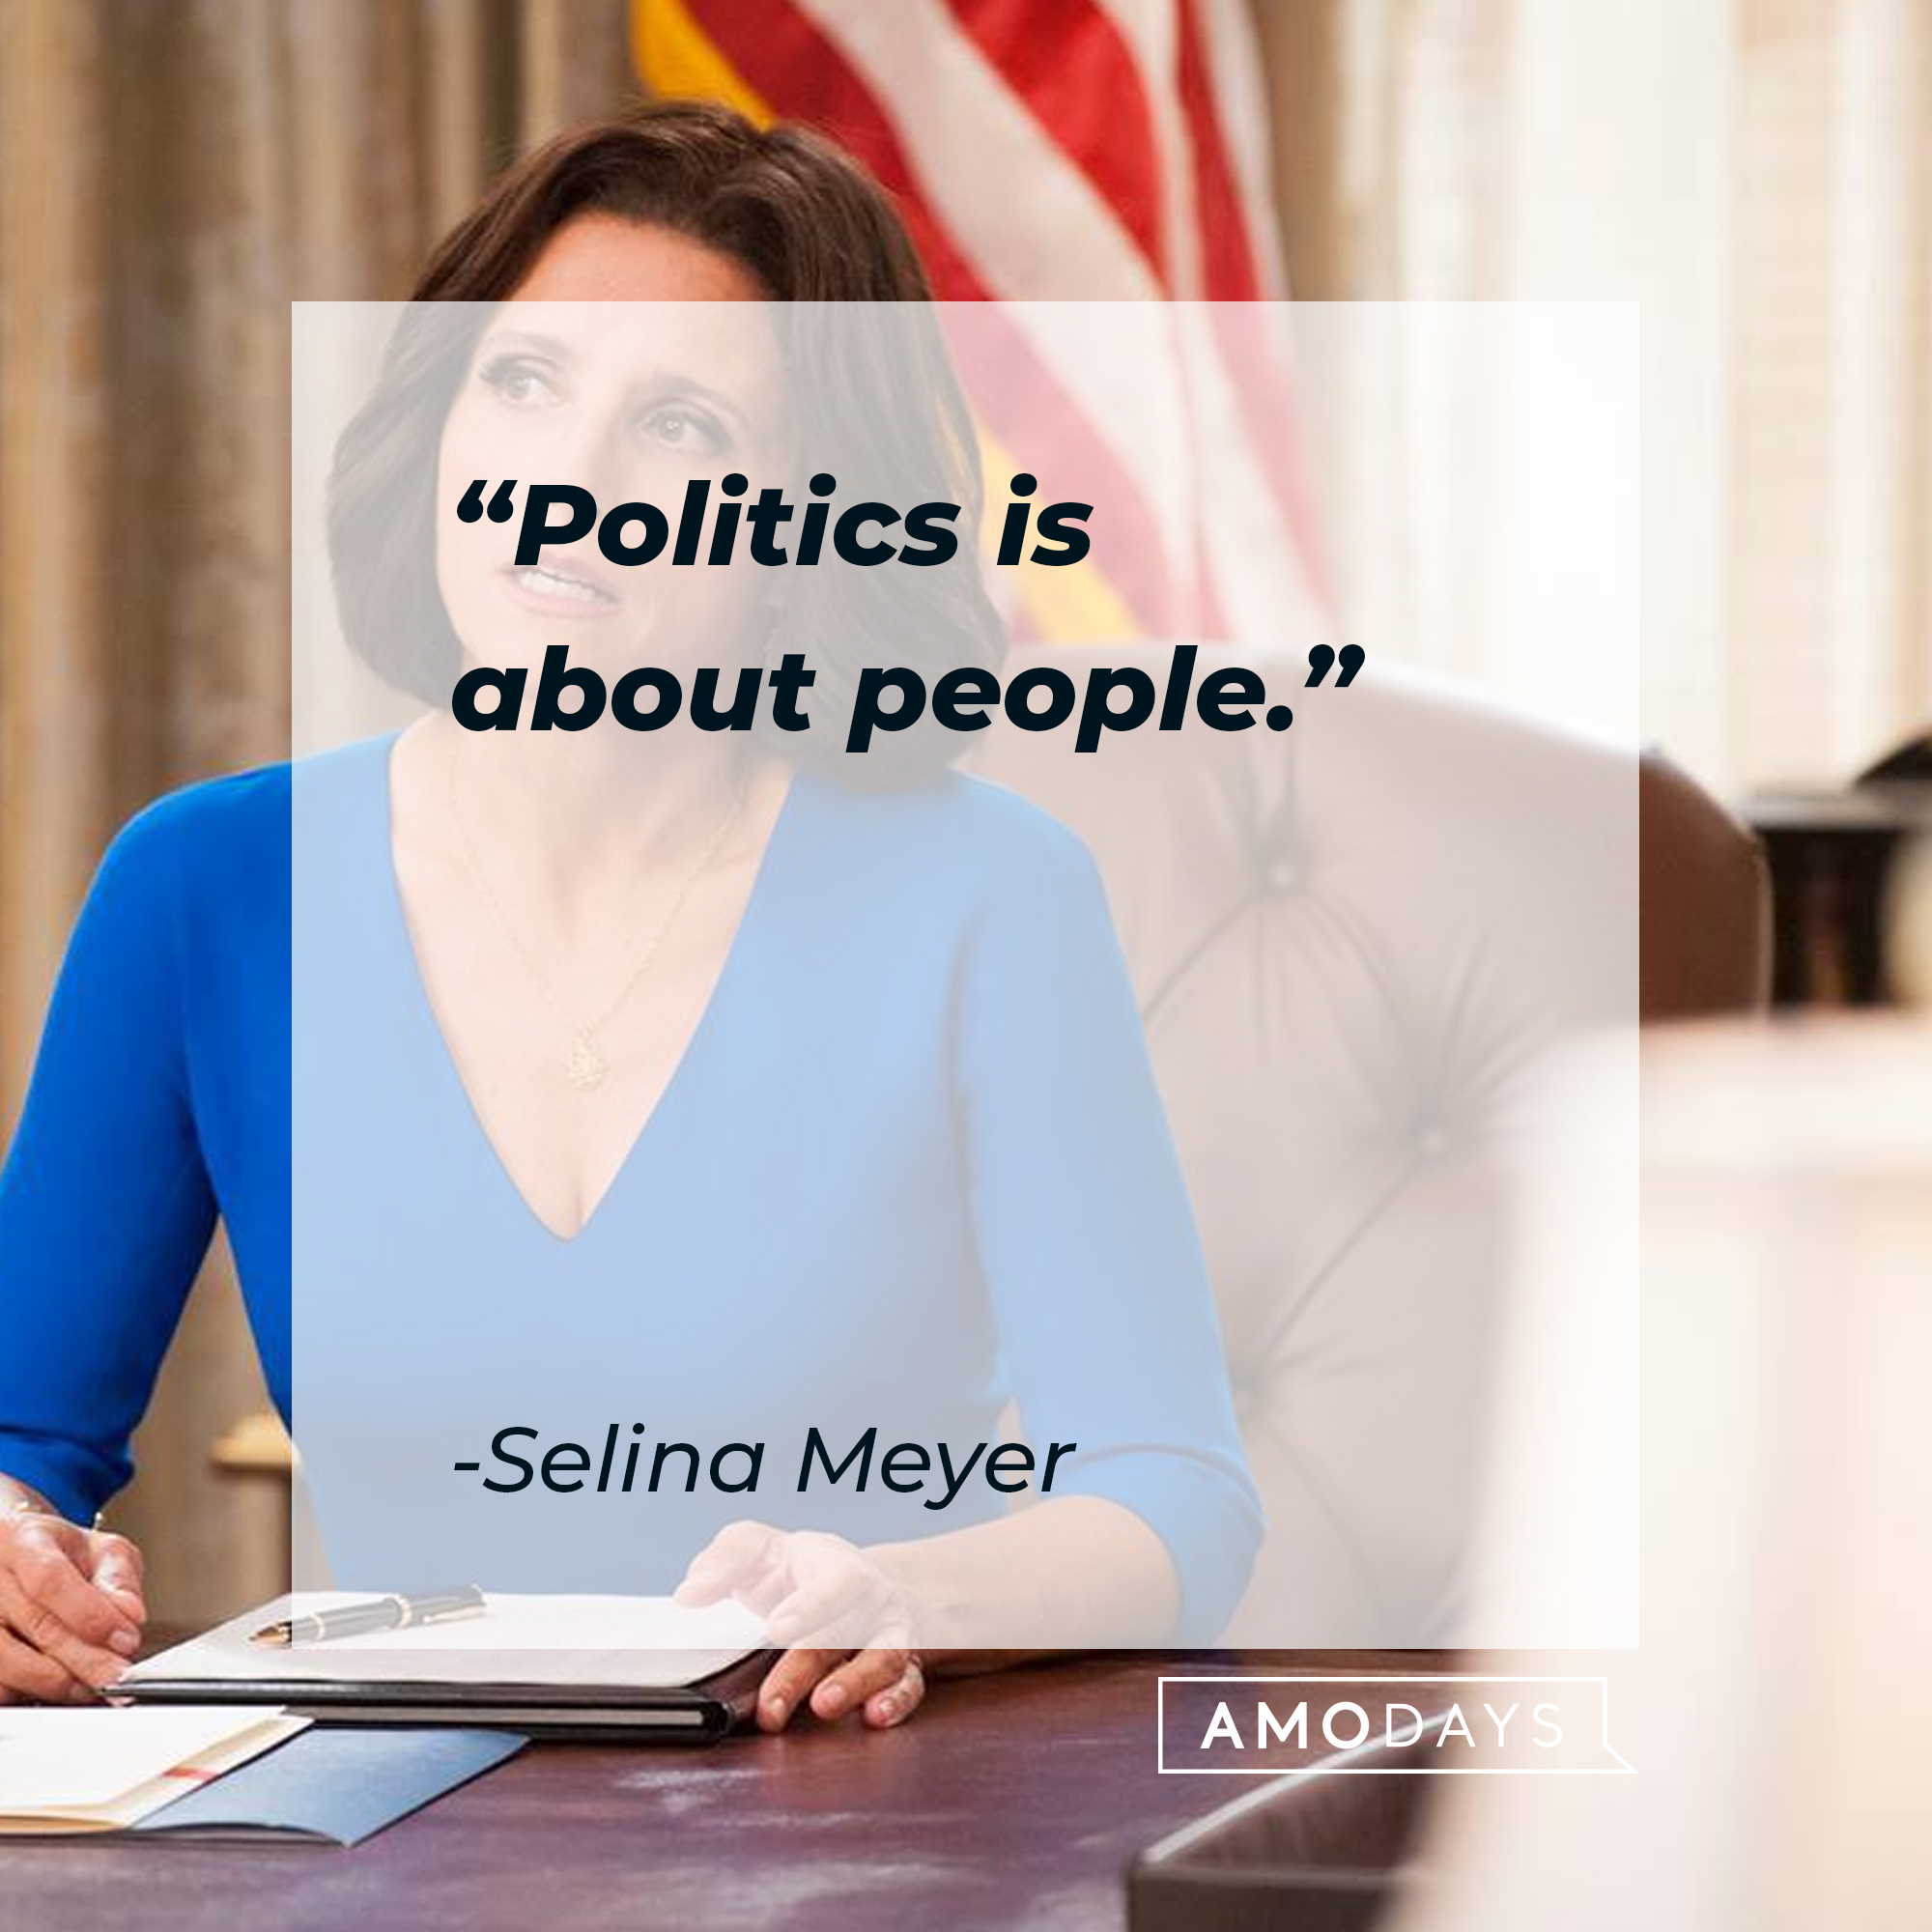 Selina Meyer with her quote: "Politics is about people." | Source: Facebook.com/veep